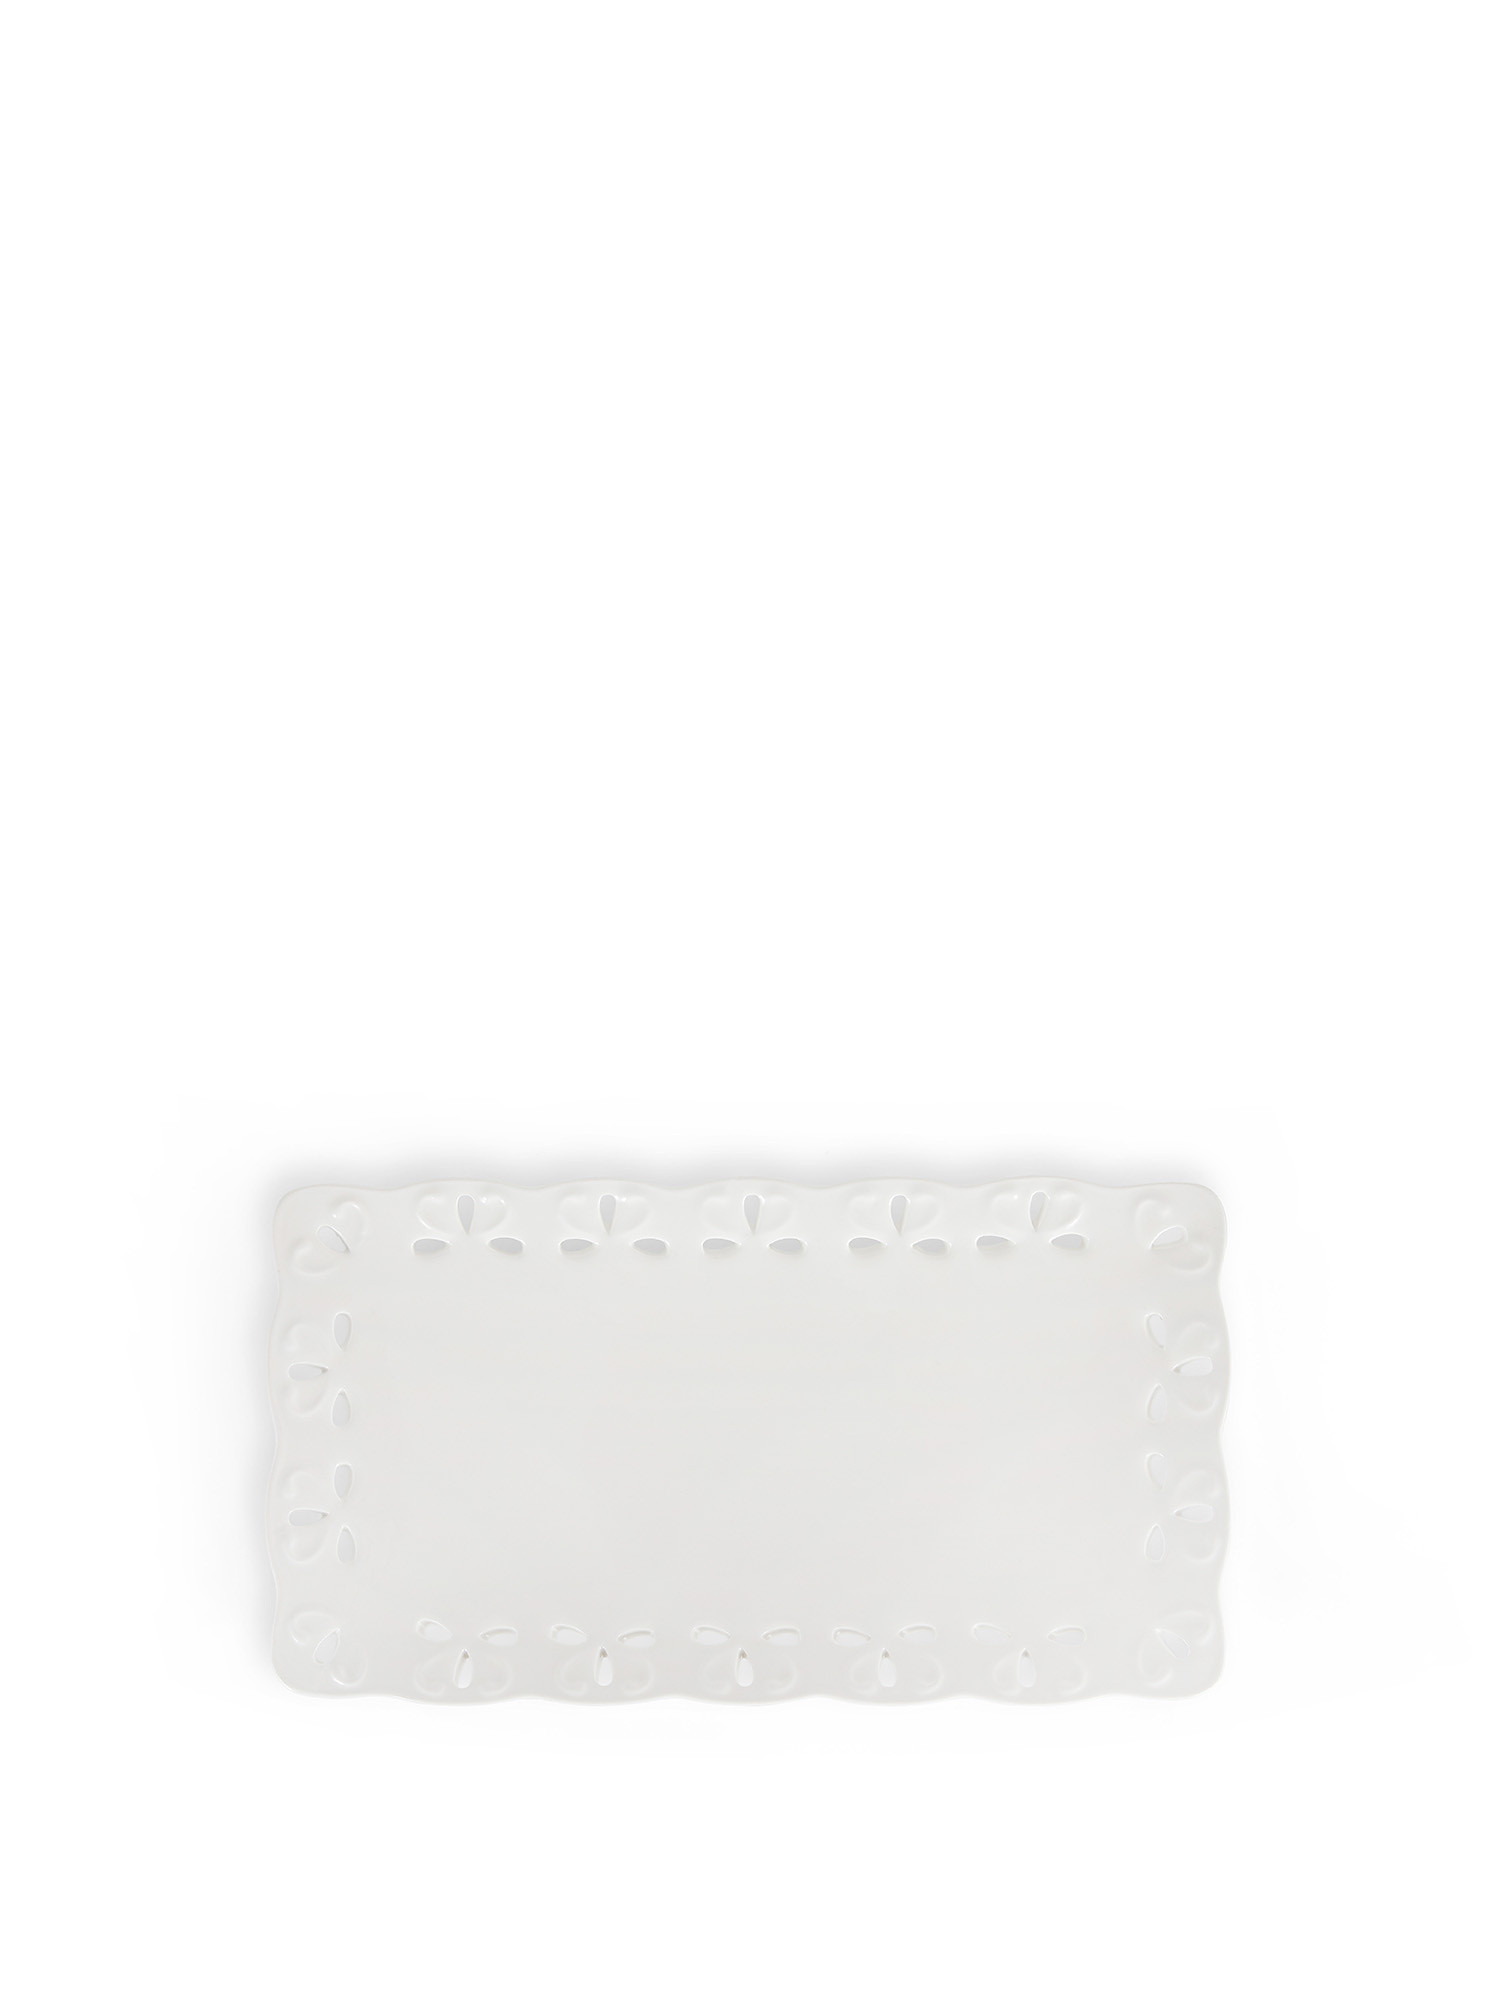 Ceramic tray with perforated edge, White, large image number 0